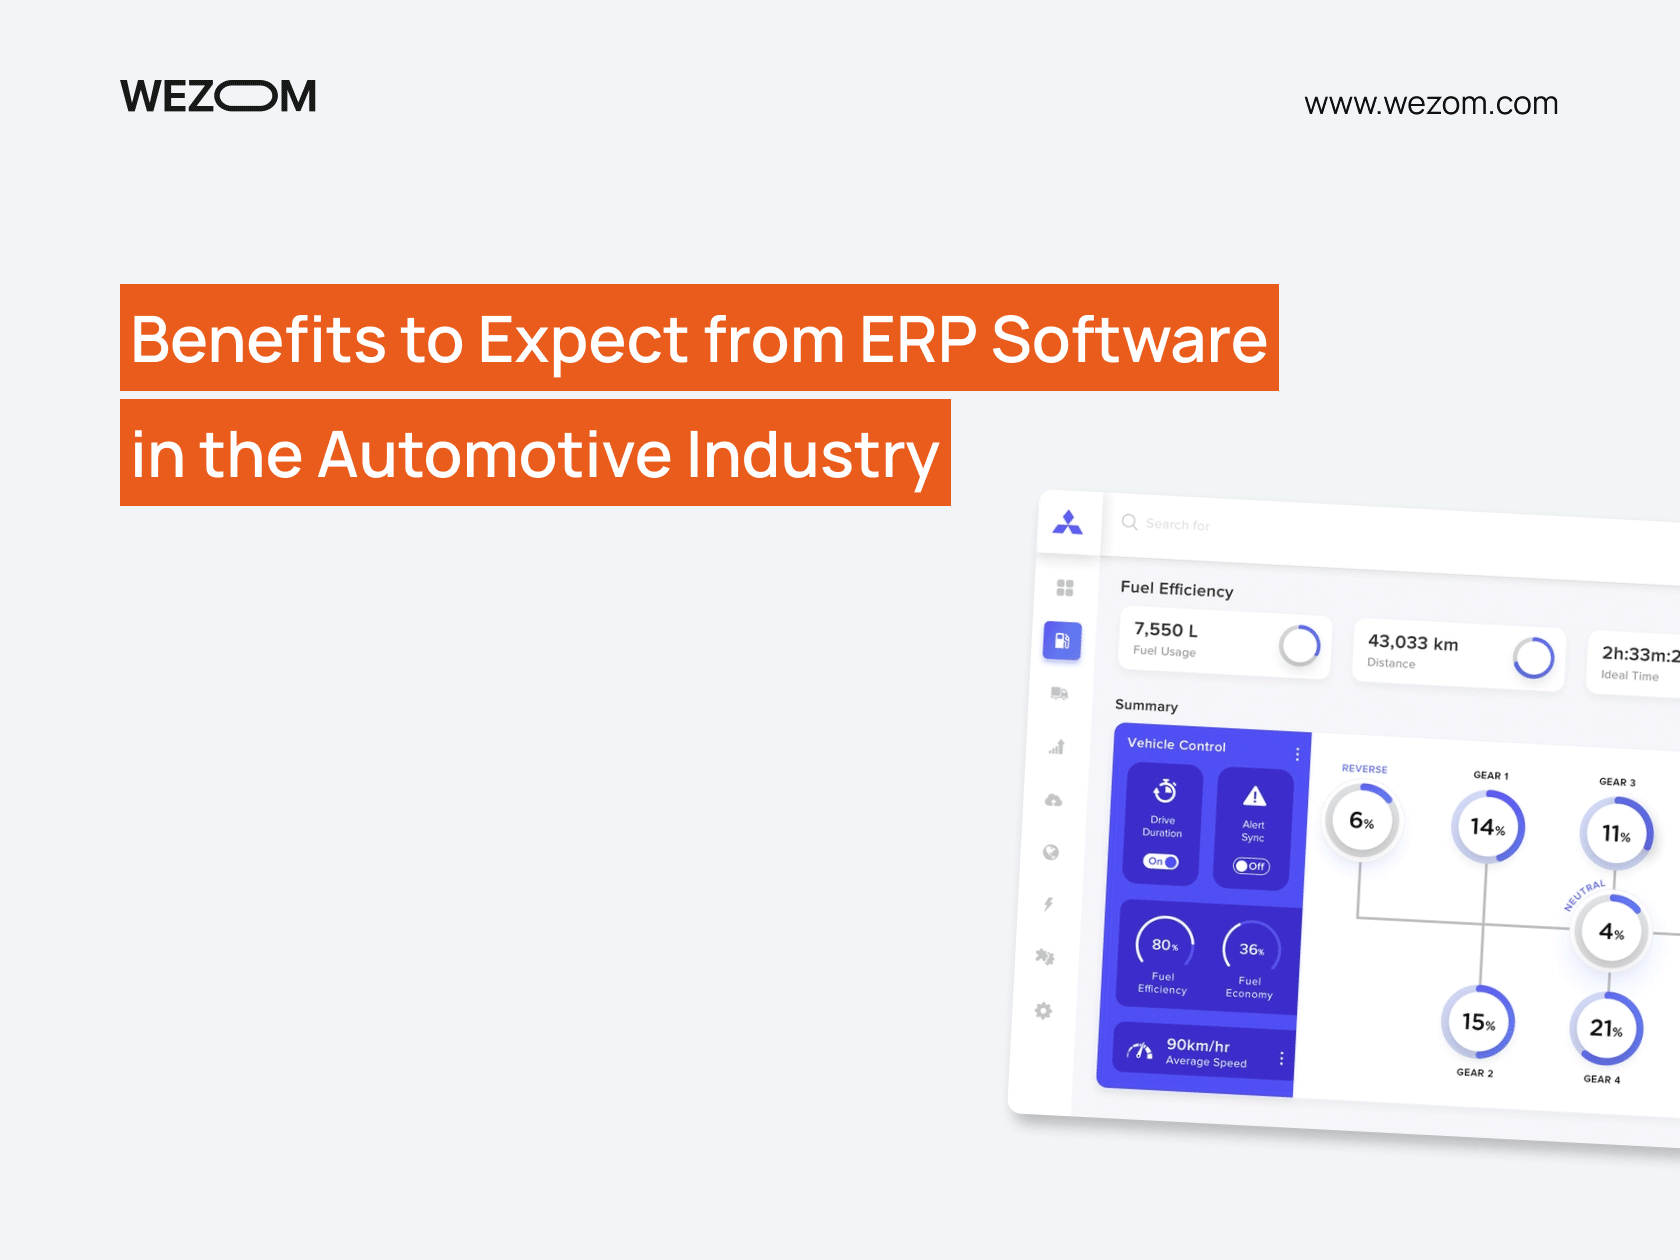 erp implementation in automobile industry